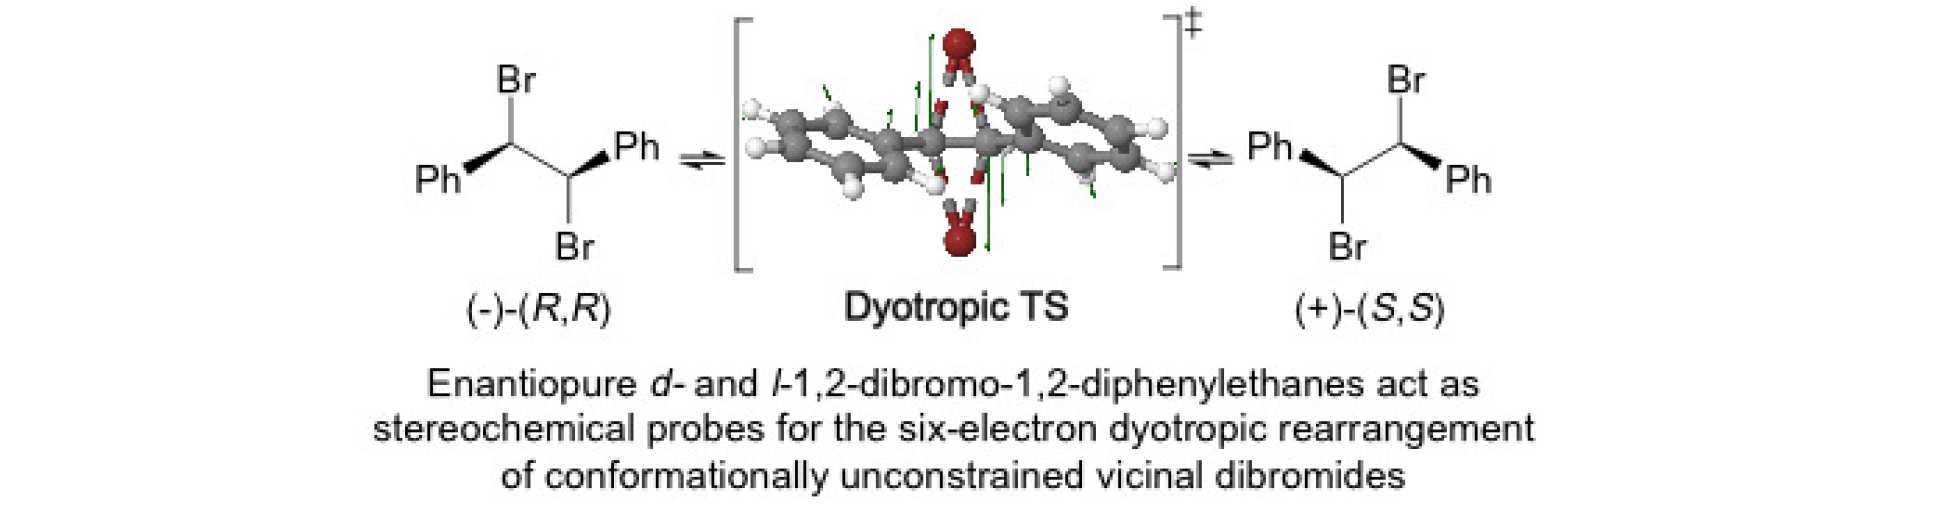 Verification of stereospecific dyotropic racemisation of enantiopure D and L-1,2-dibromo-1,2-diphenylethane in non-polar media